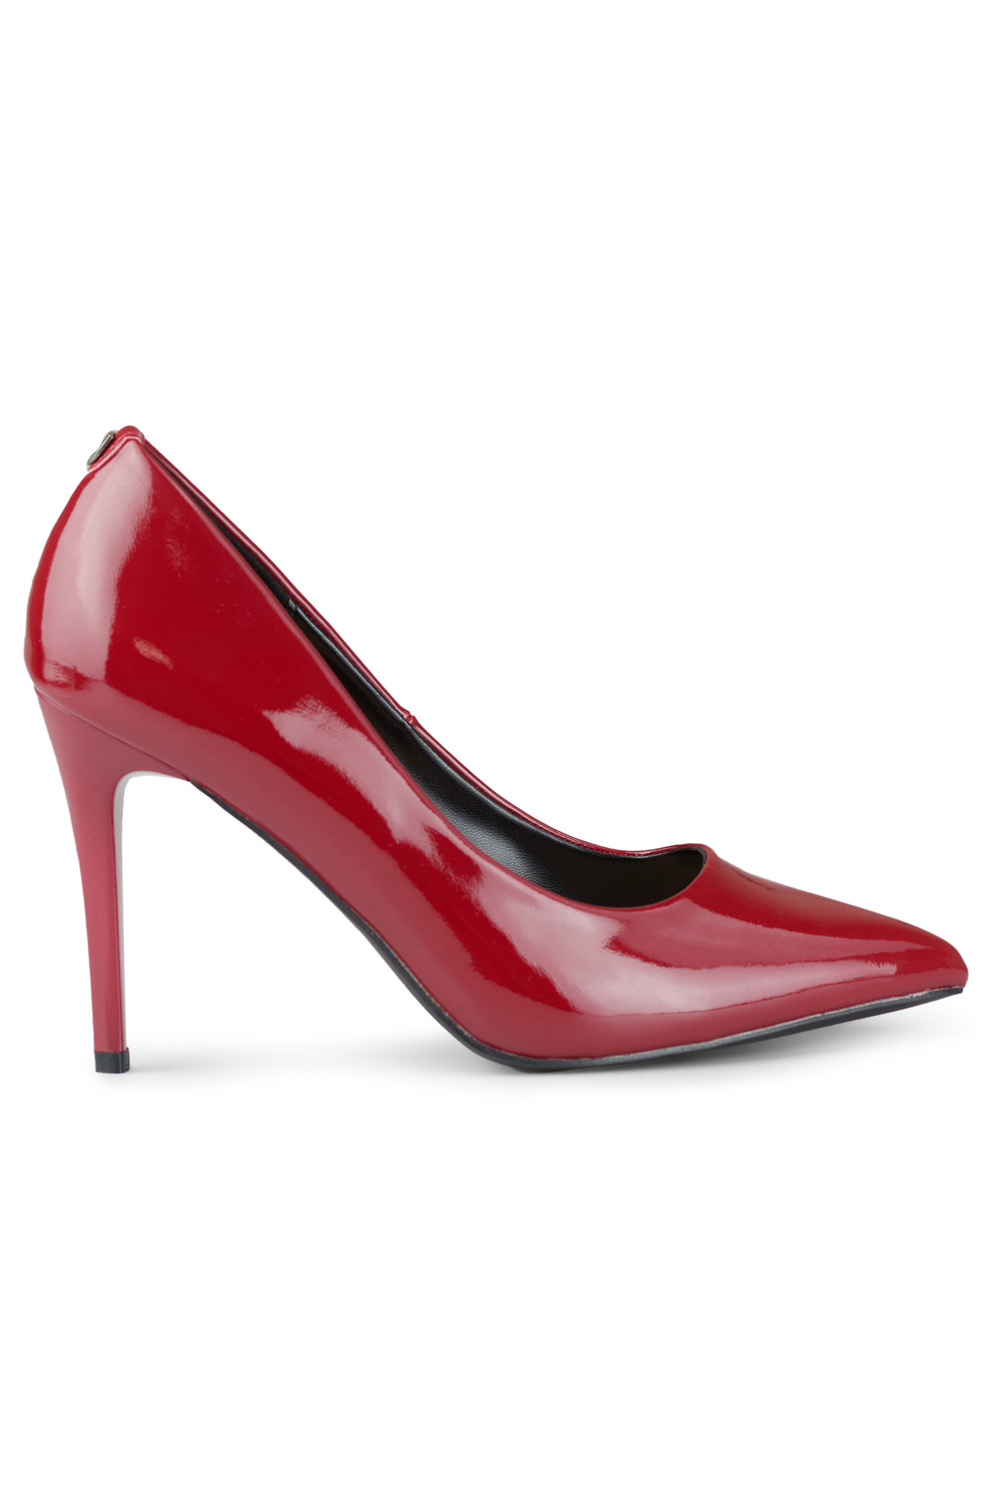  High heels model 190645 PRIMO  red